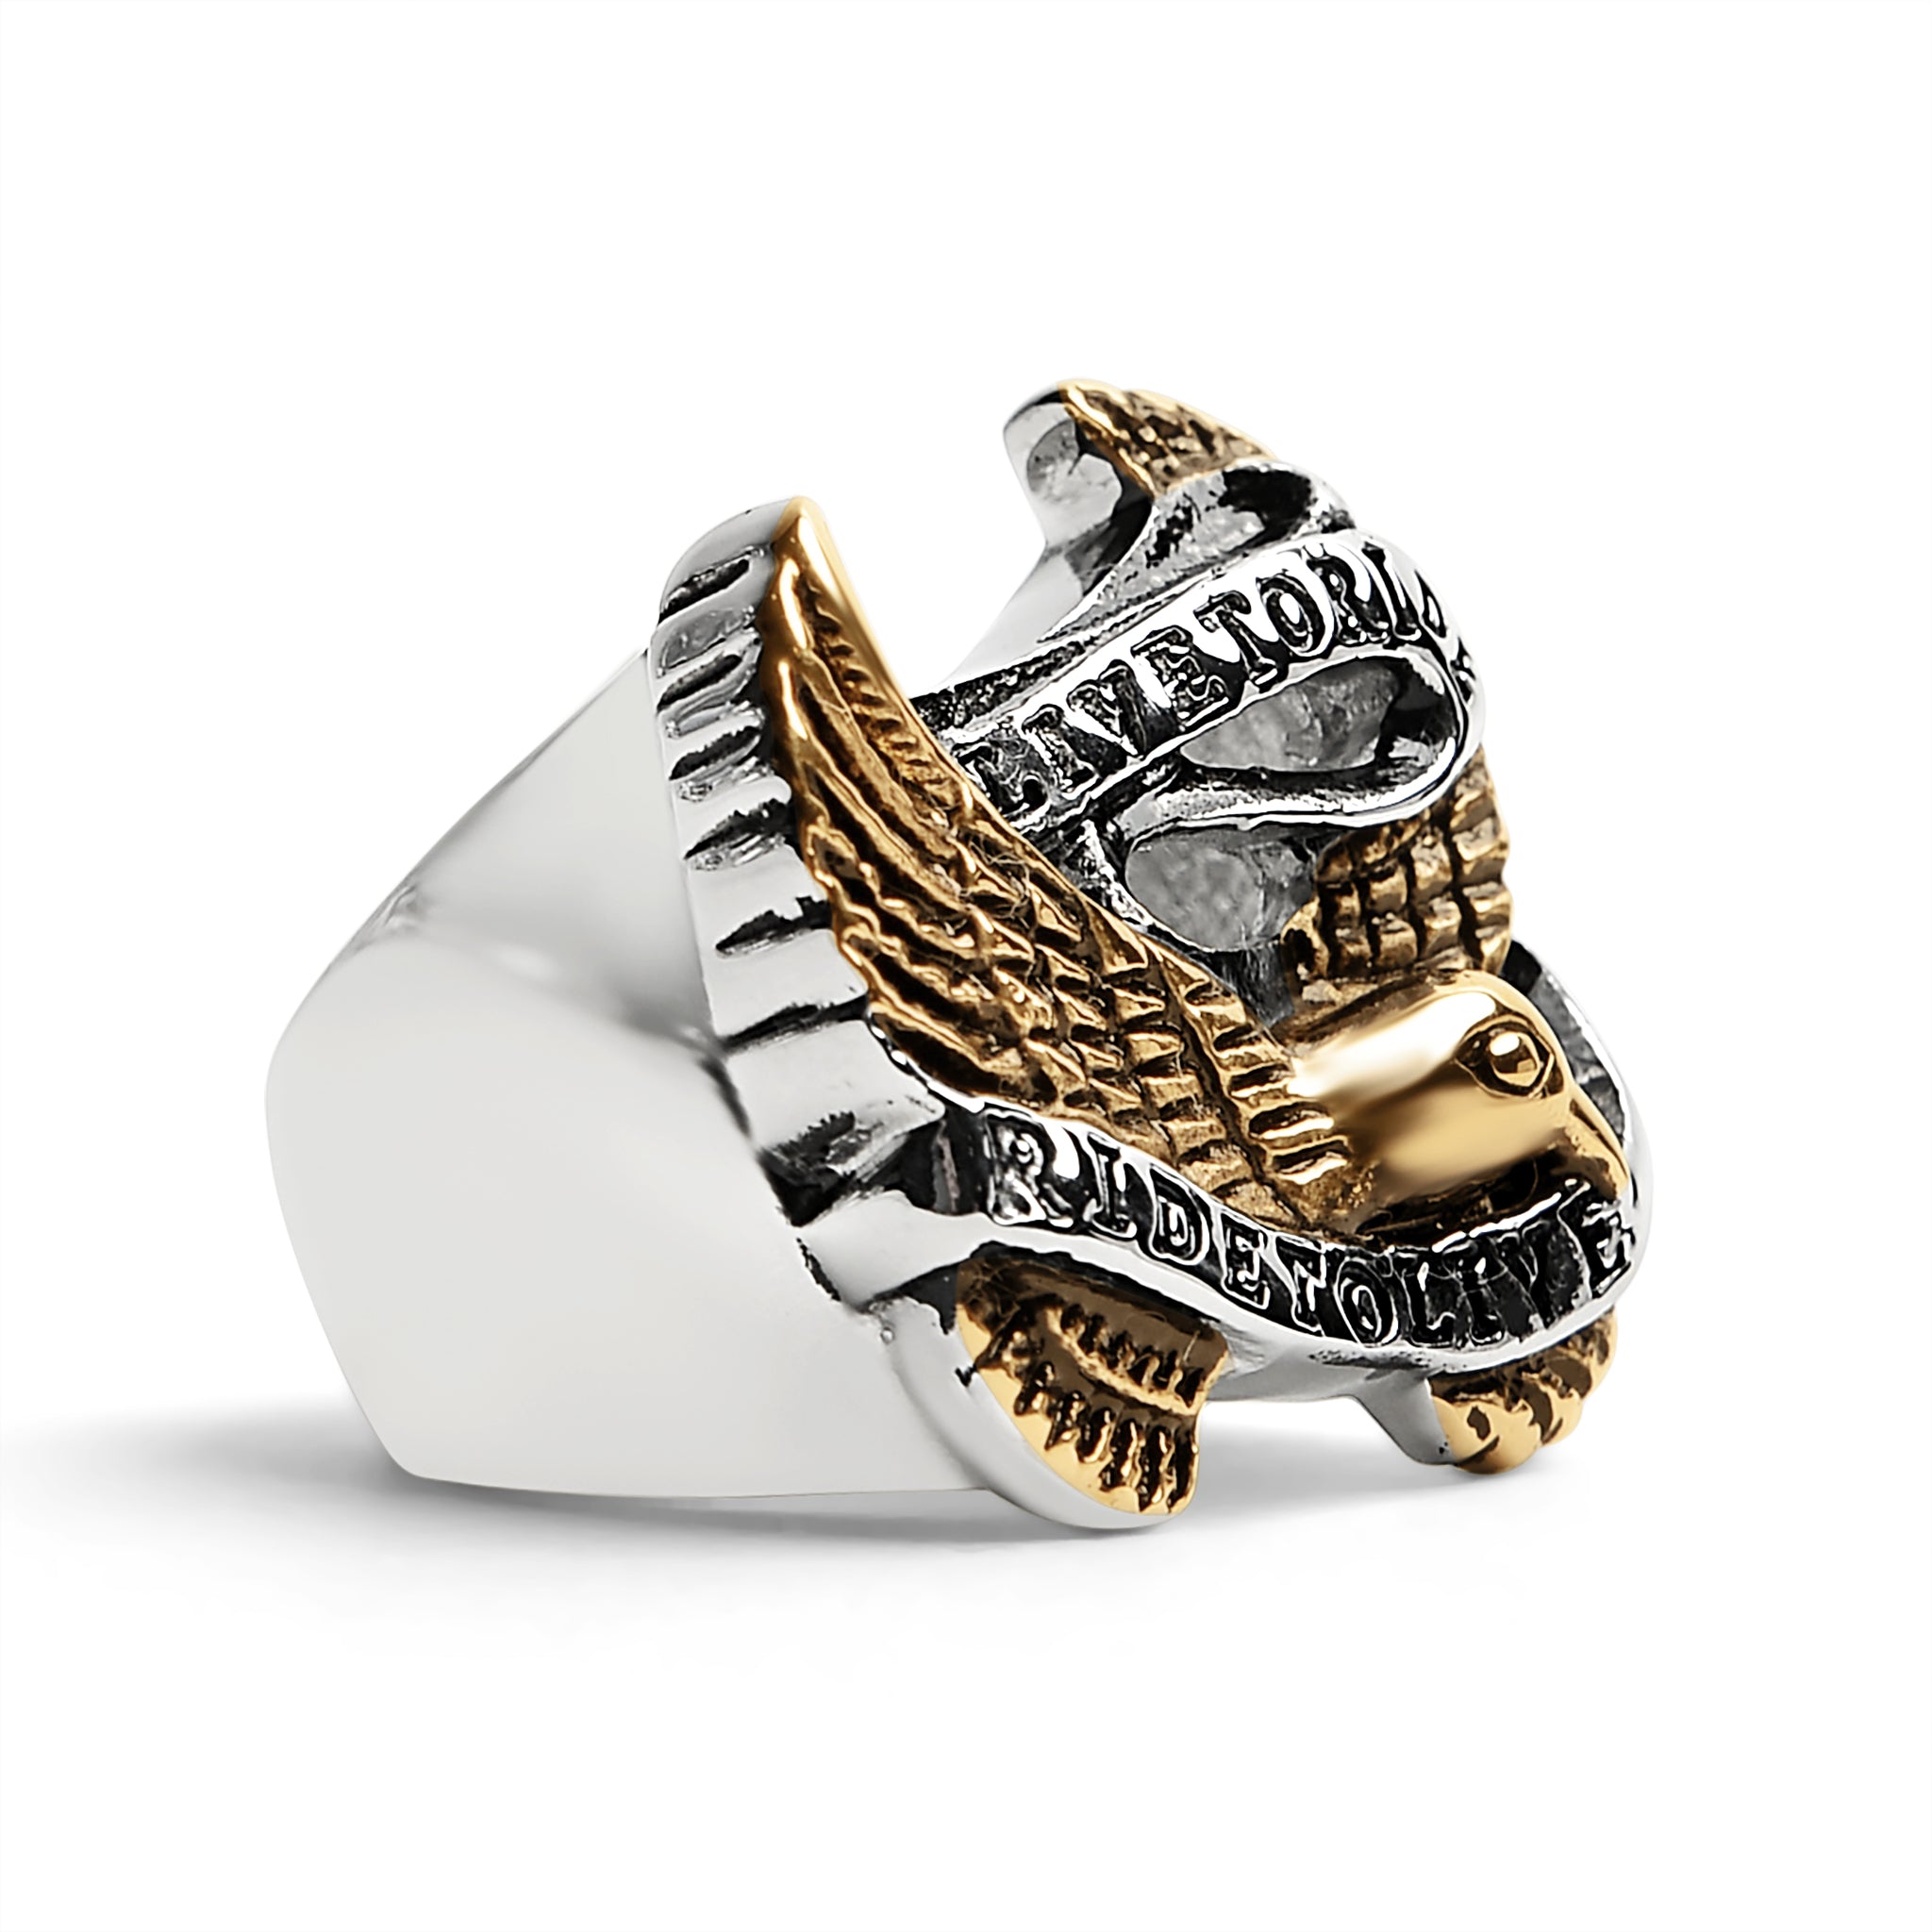 Stainless Steel 18K Gold PVD Coated "Live To Ride" "Ride To Live" Eagle Biker Ring / SCR3086